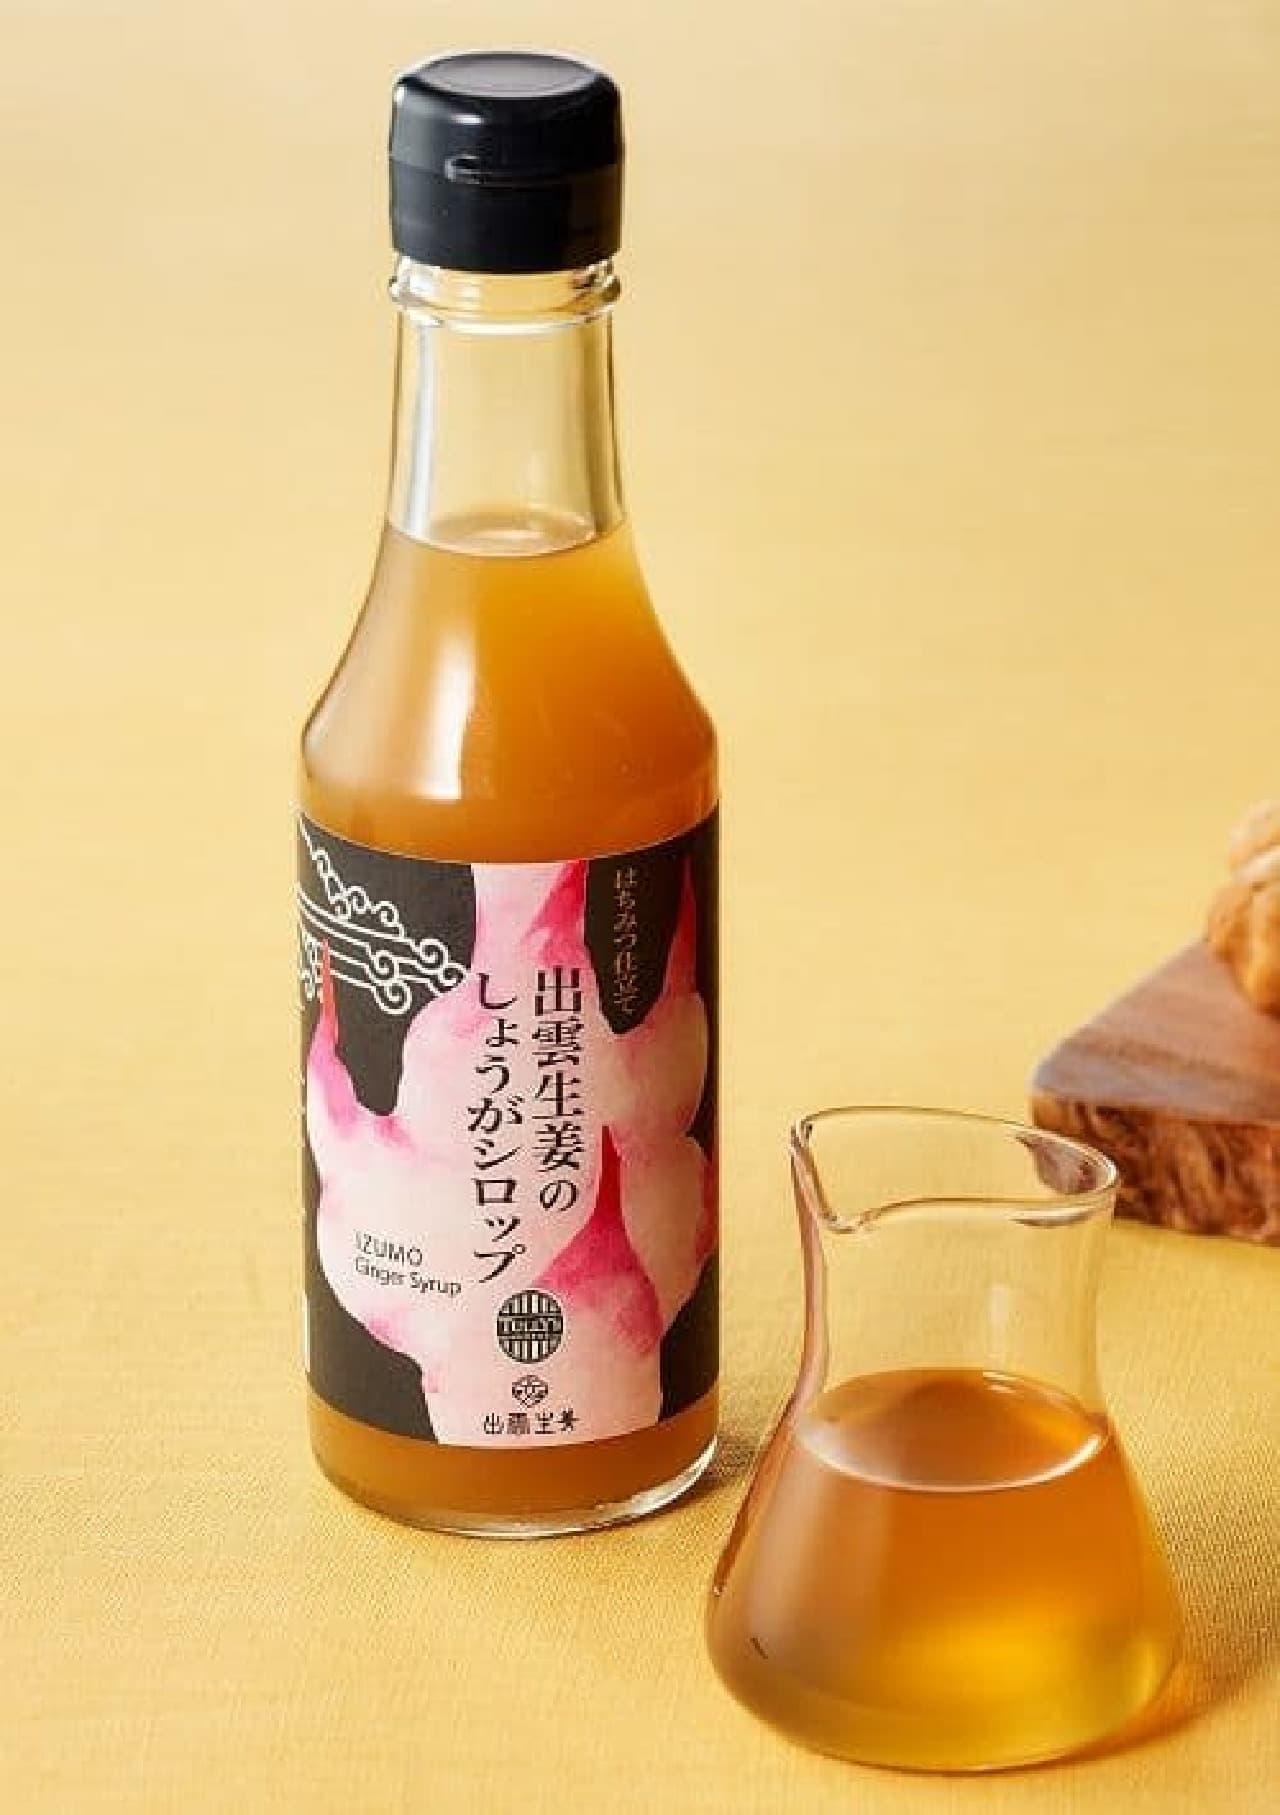 Tully's Coffee "Izumo Ginger Ginger Syrup".